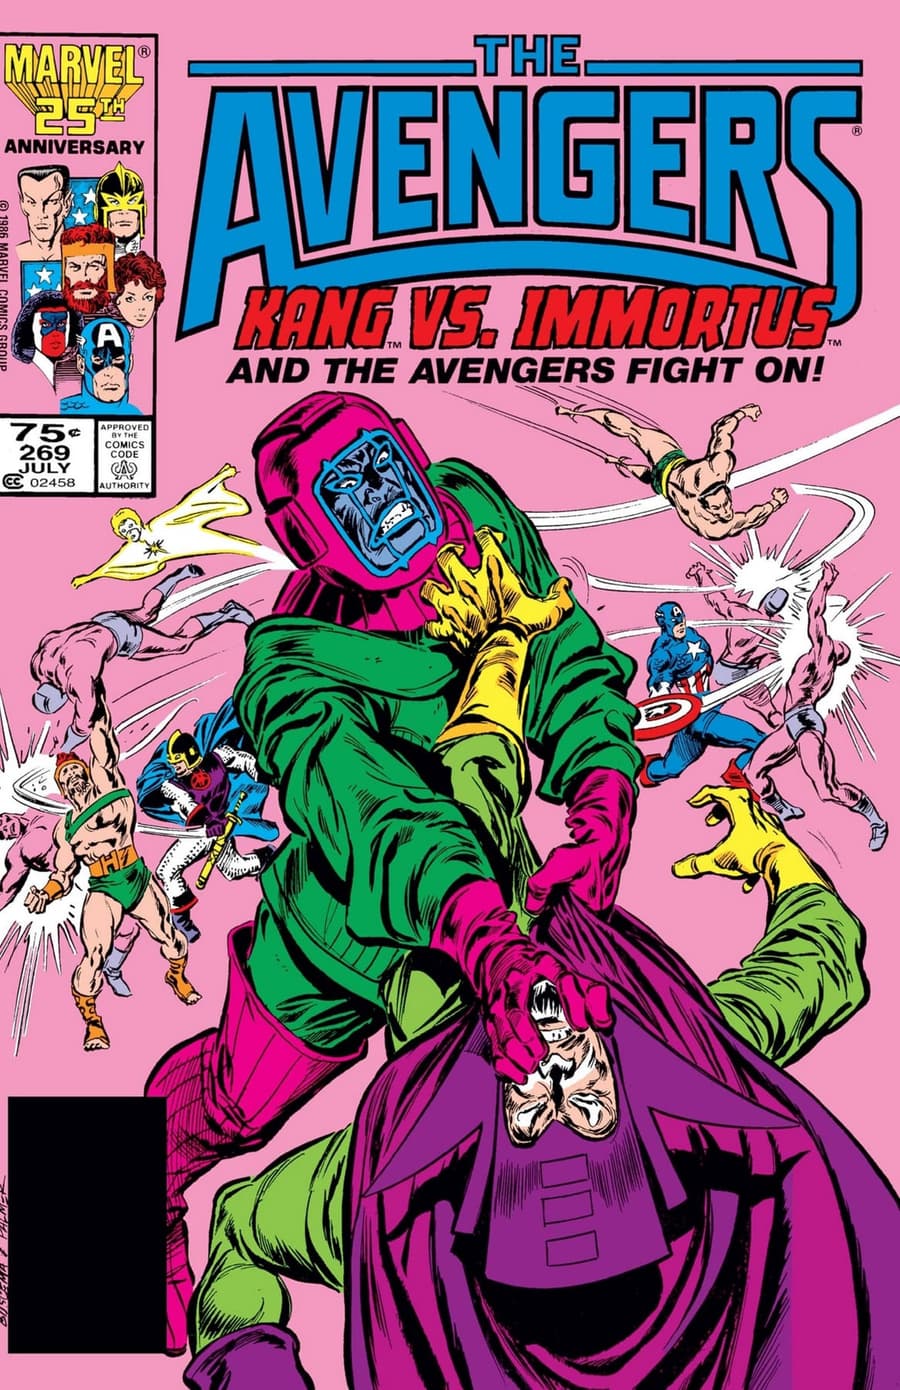 AVENGERS (1963) #269 cover by John Buscema and Tom Palmer